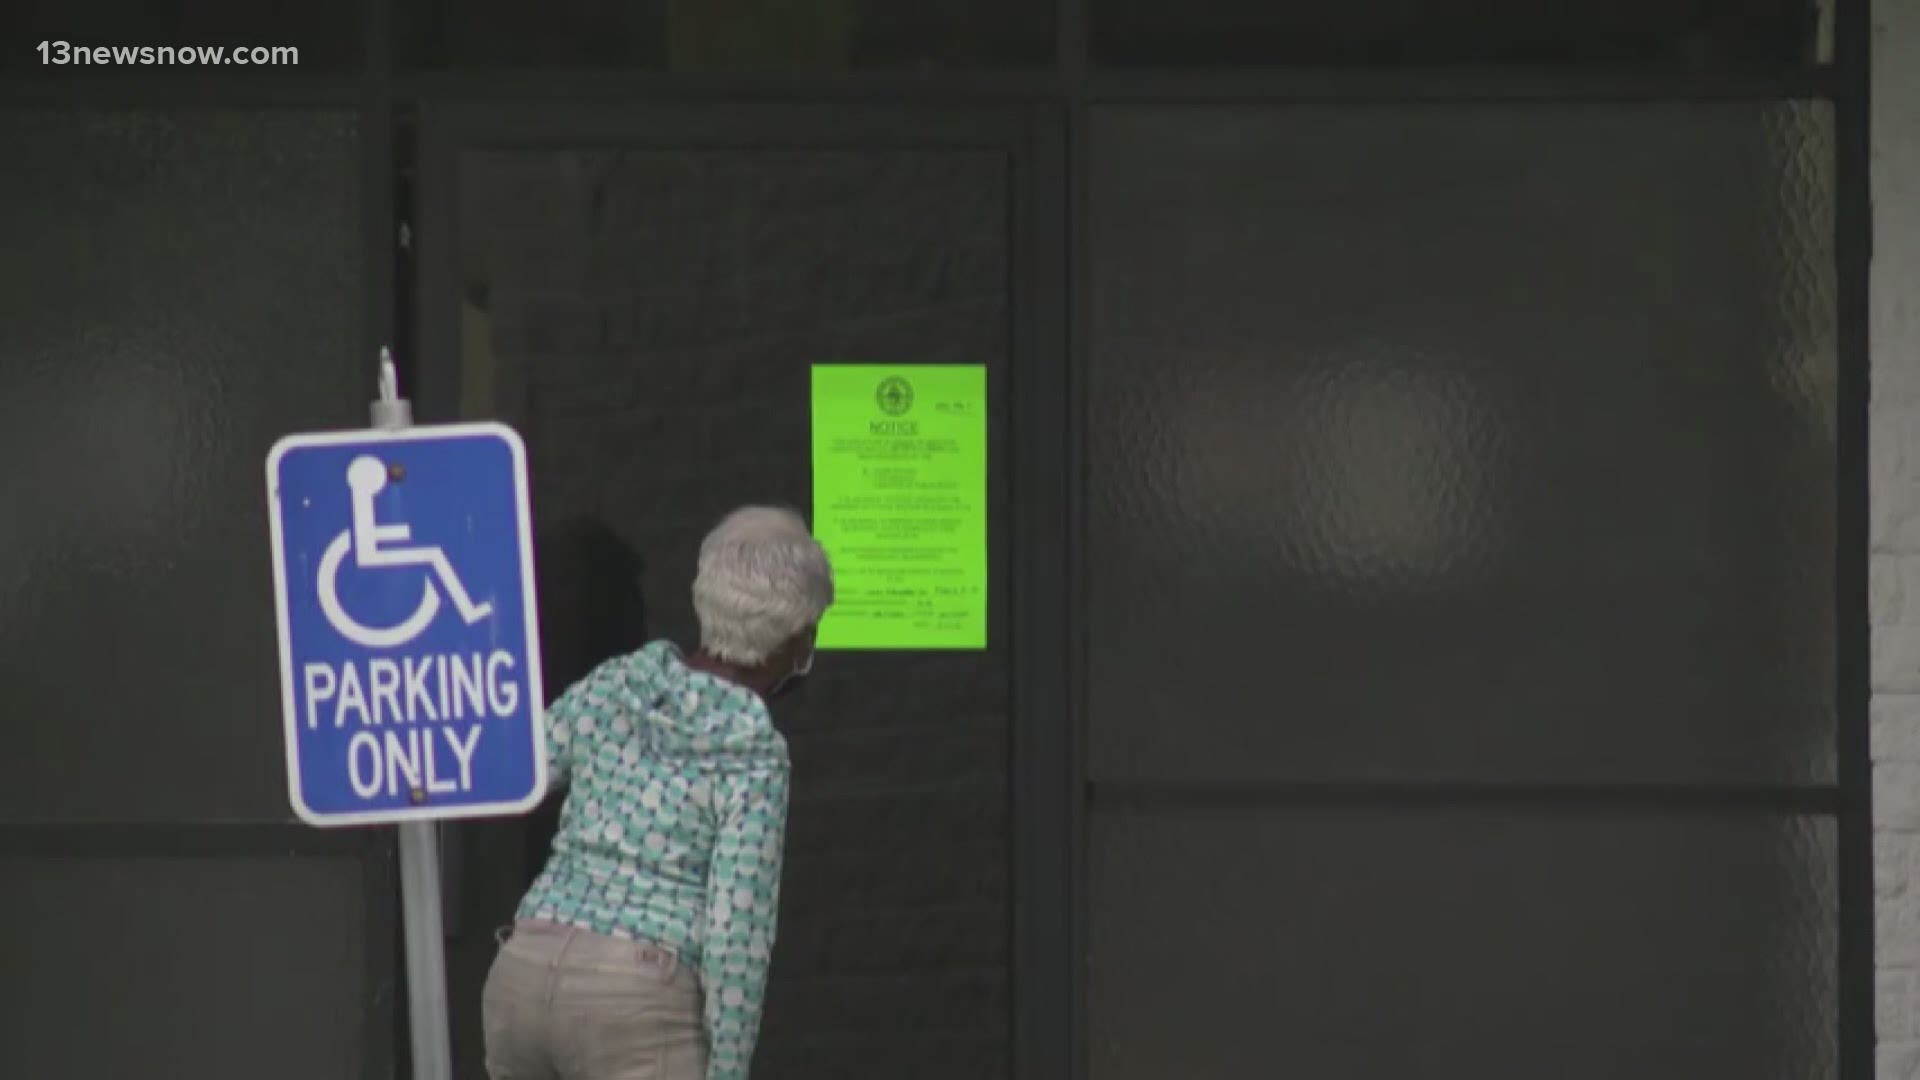 The City of Norfolk deemed the top floors of Lakewood Plaza "unsafe or unfit for habitation" because of broken elevators. Residents said it's a long-standing issue.